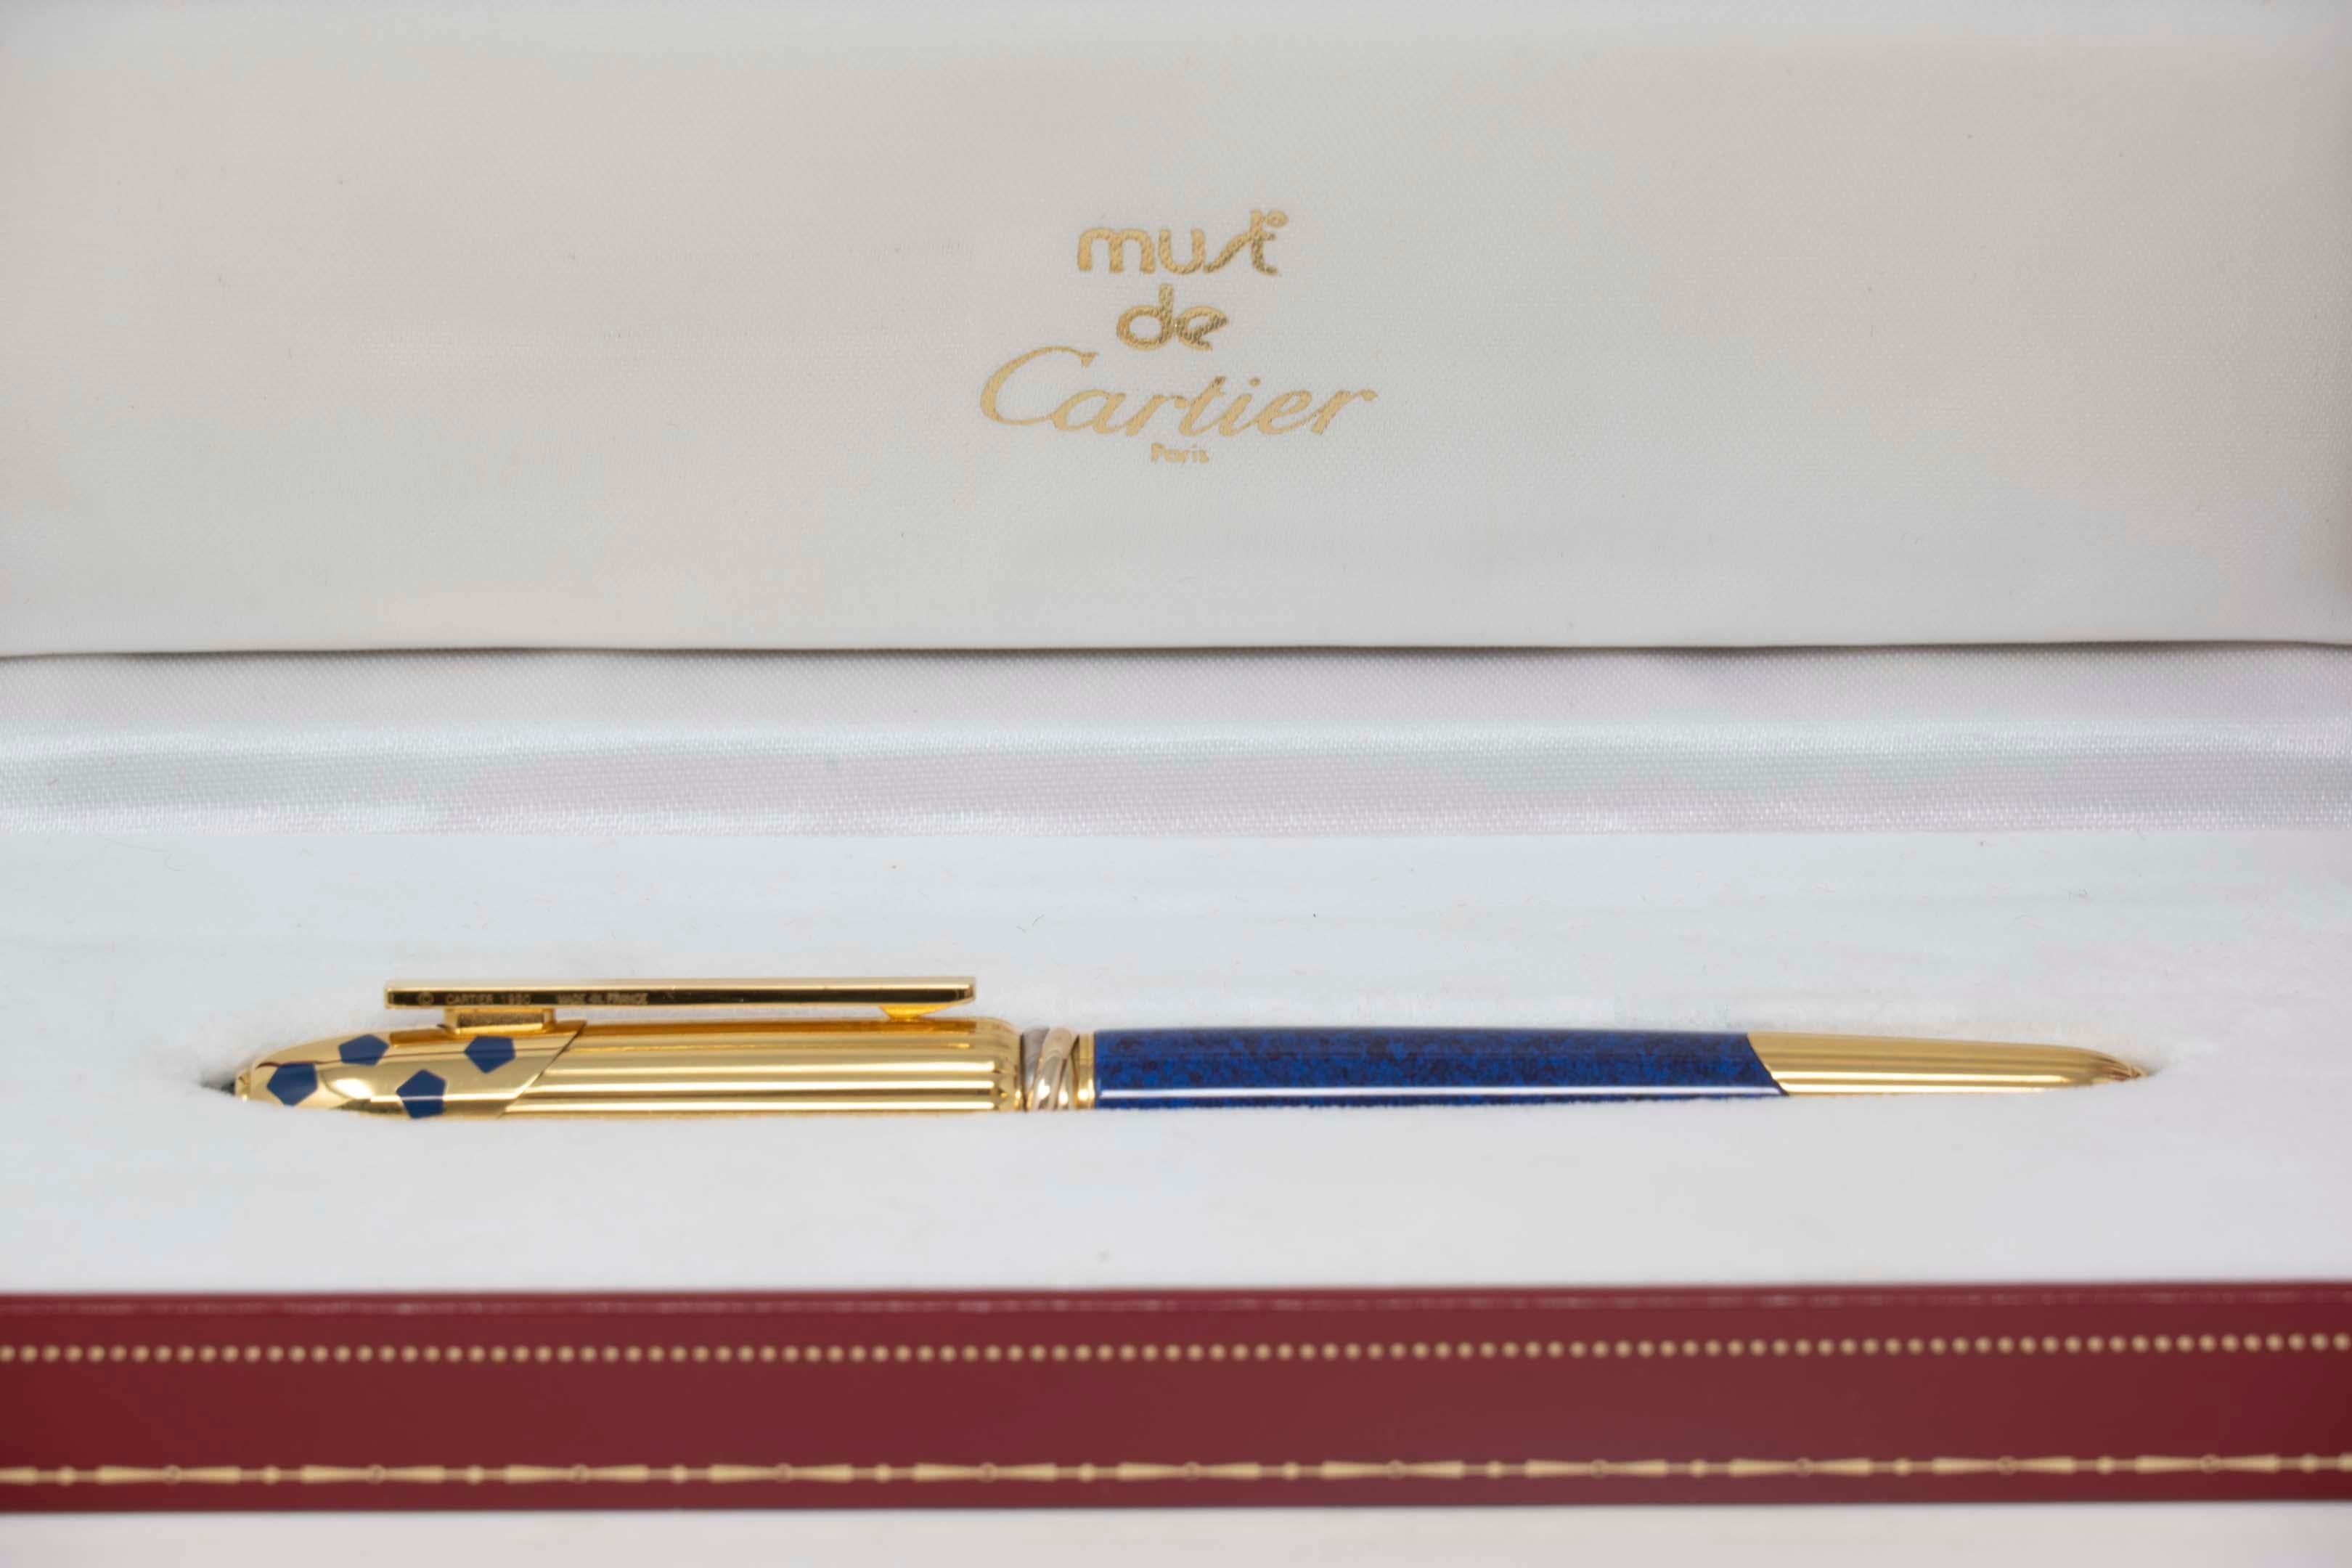 Cartier Panthere  ballpoint pen, 18k gold-plated and blue spotted enamel with original box ref 069009. Measures 13cm long, in good condition, minimal sign of wear. Materials include enamel, gold-plated steel. Circa 1990, original Cartier refill.
